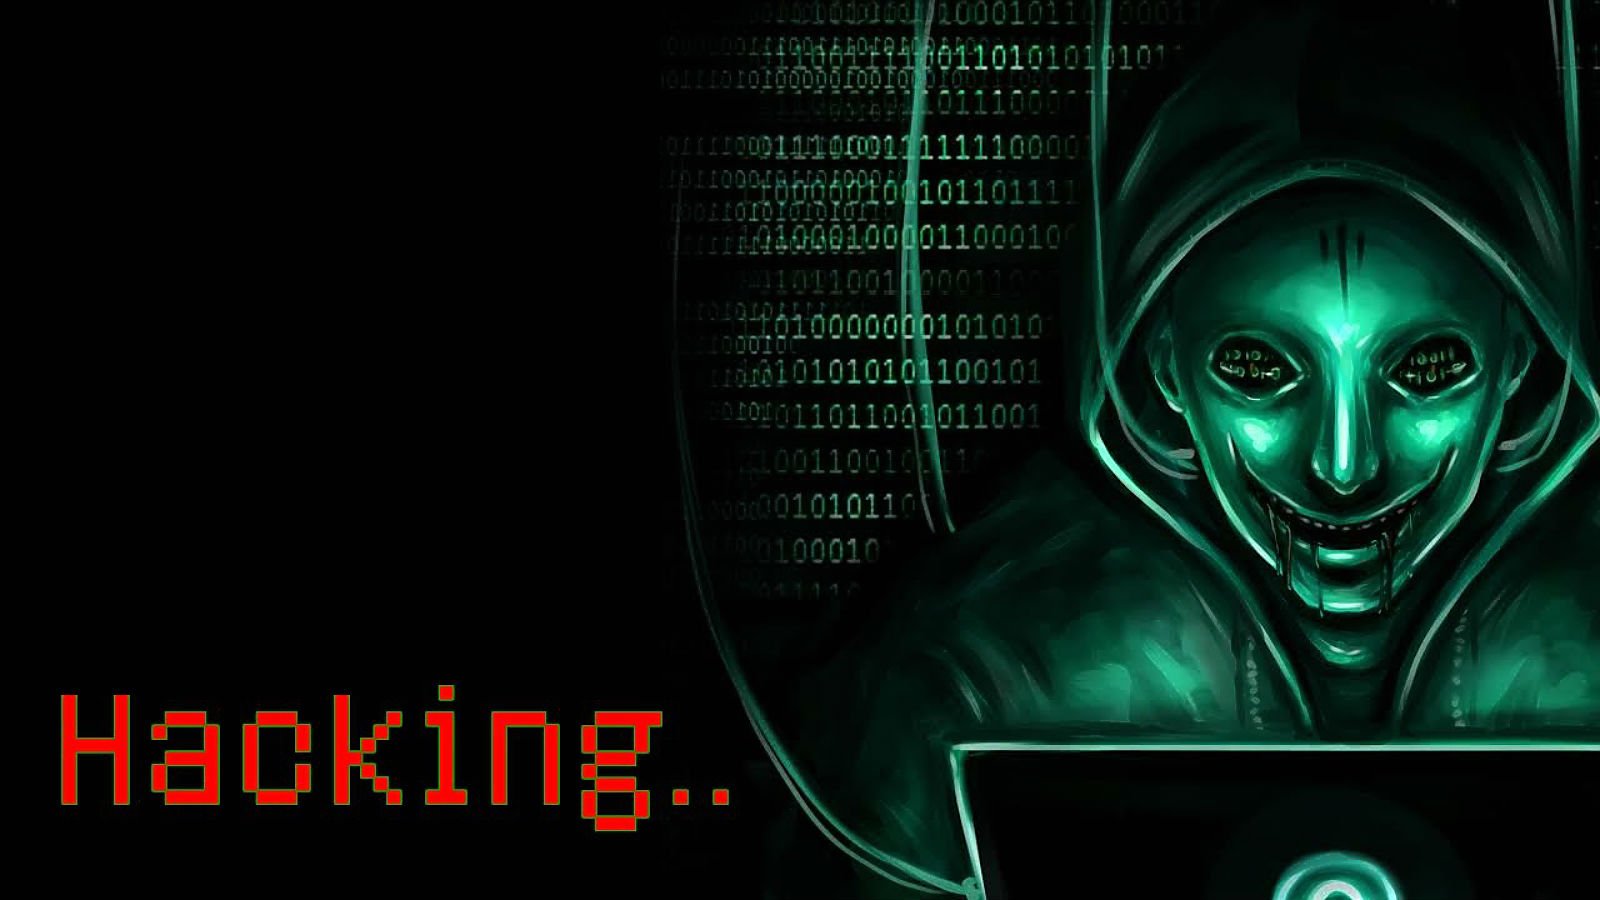 hacker, Hack, Hacking, Internet, Computer, Anarchy, Poster Wallpapers